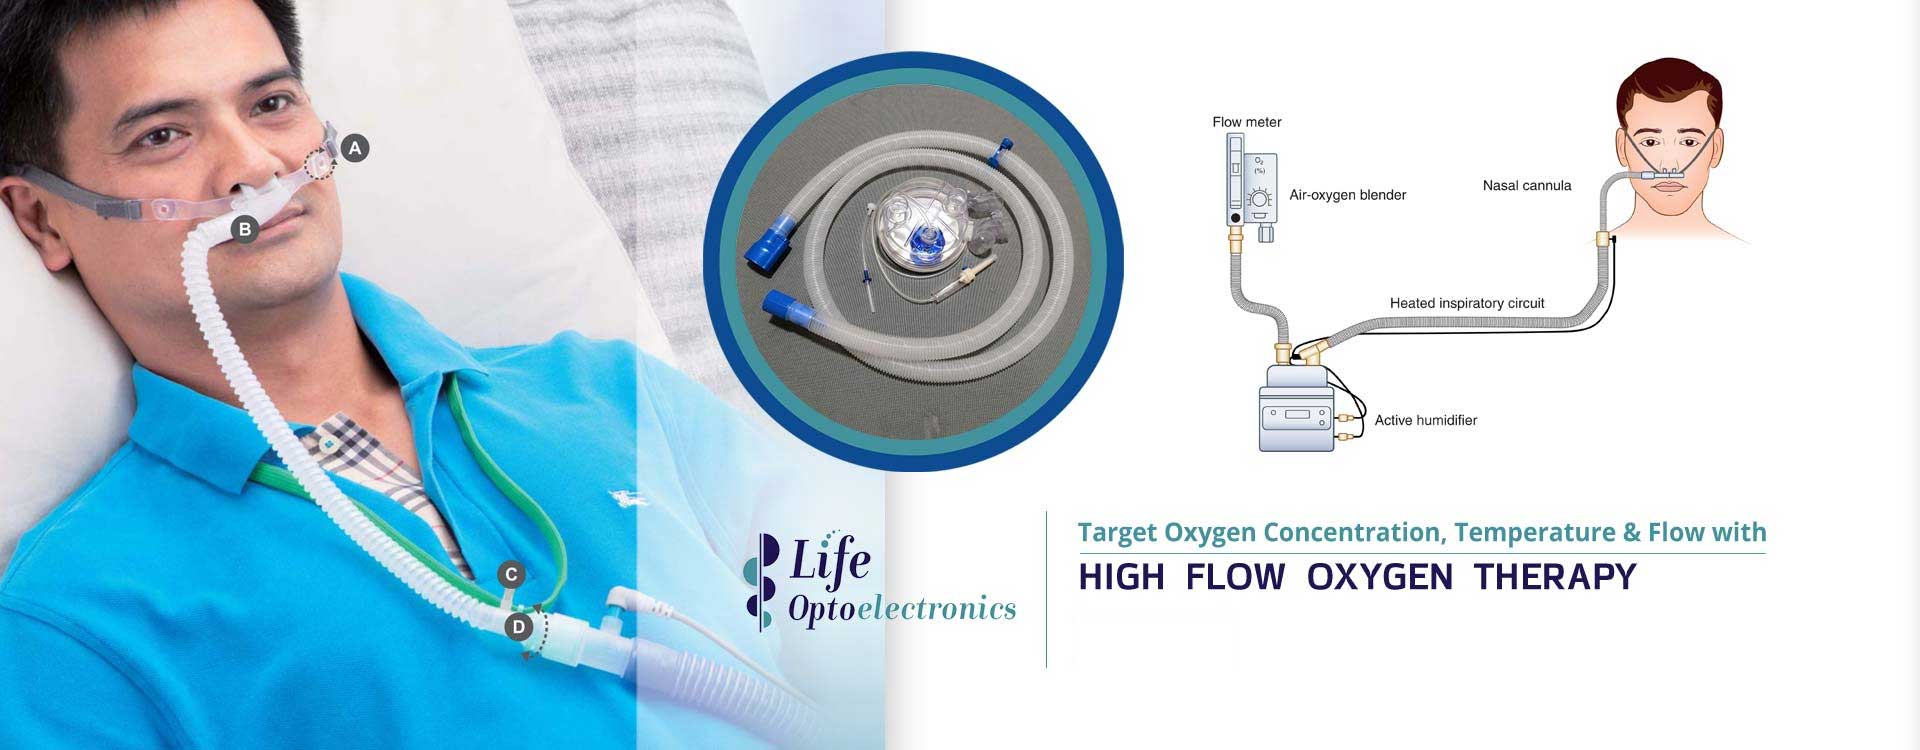 High Flow Oxygen Therapy Devices Online  Manufacturers in Visakhapatnam (Vizag)